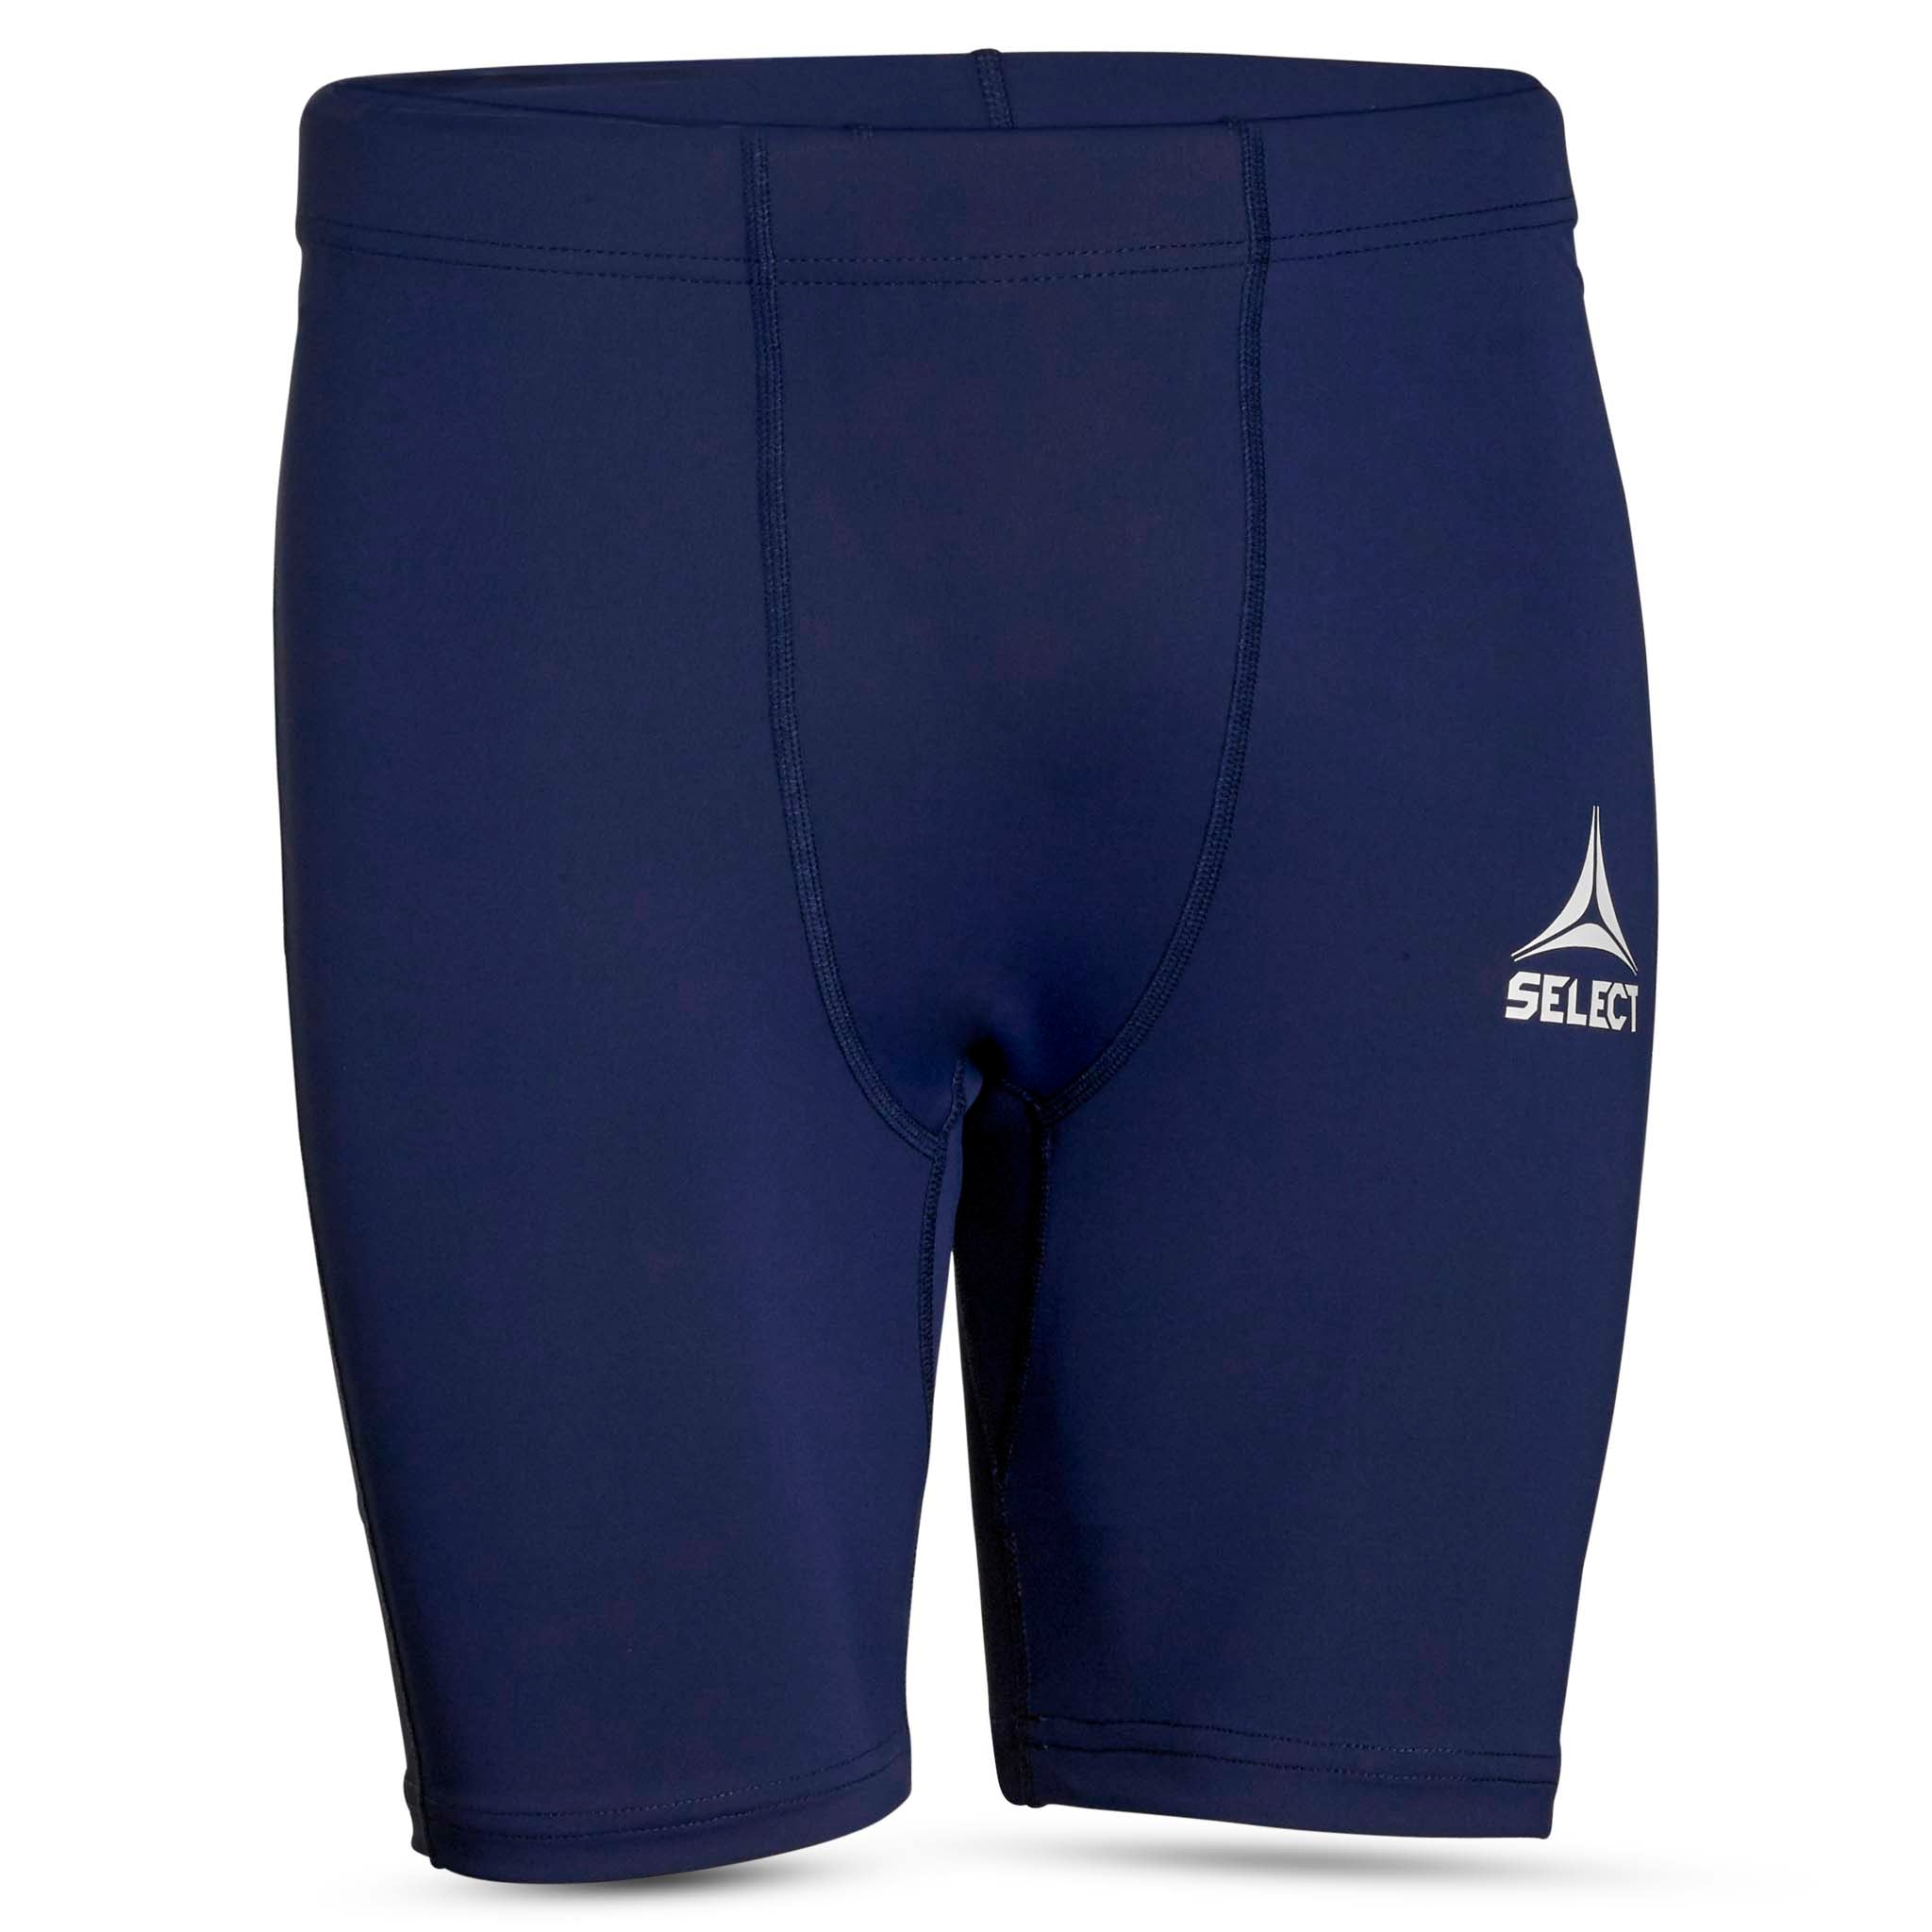 Compression shorts for football practice - Fútbol Emotion